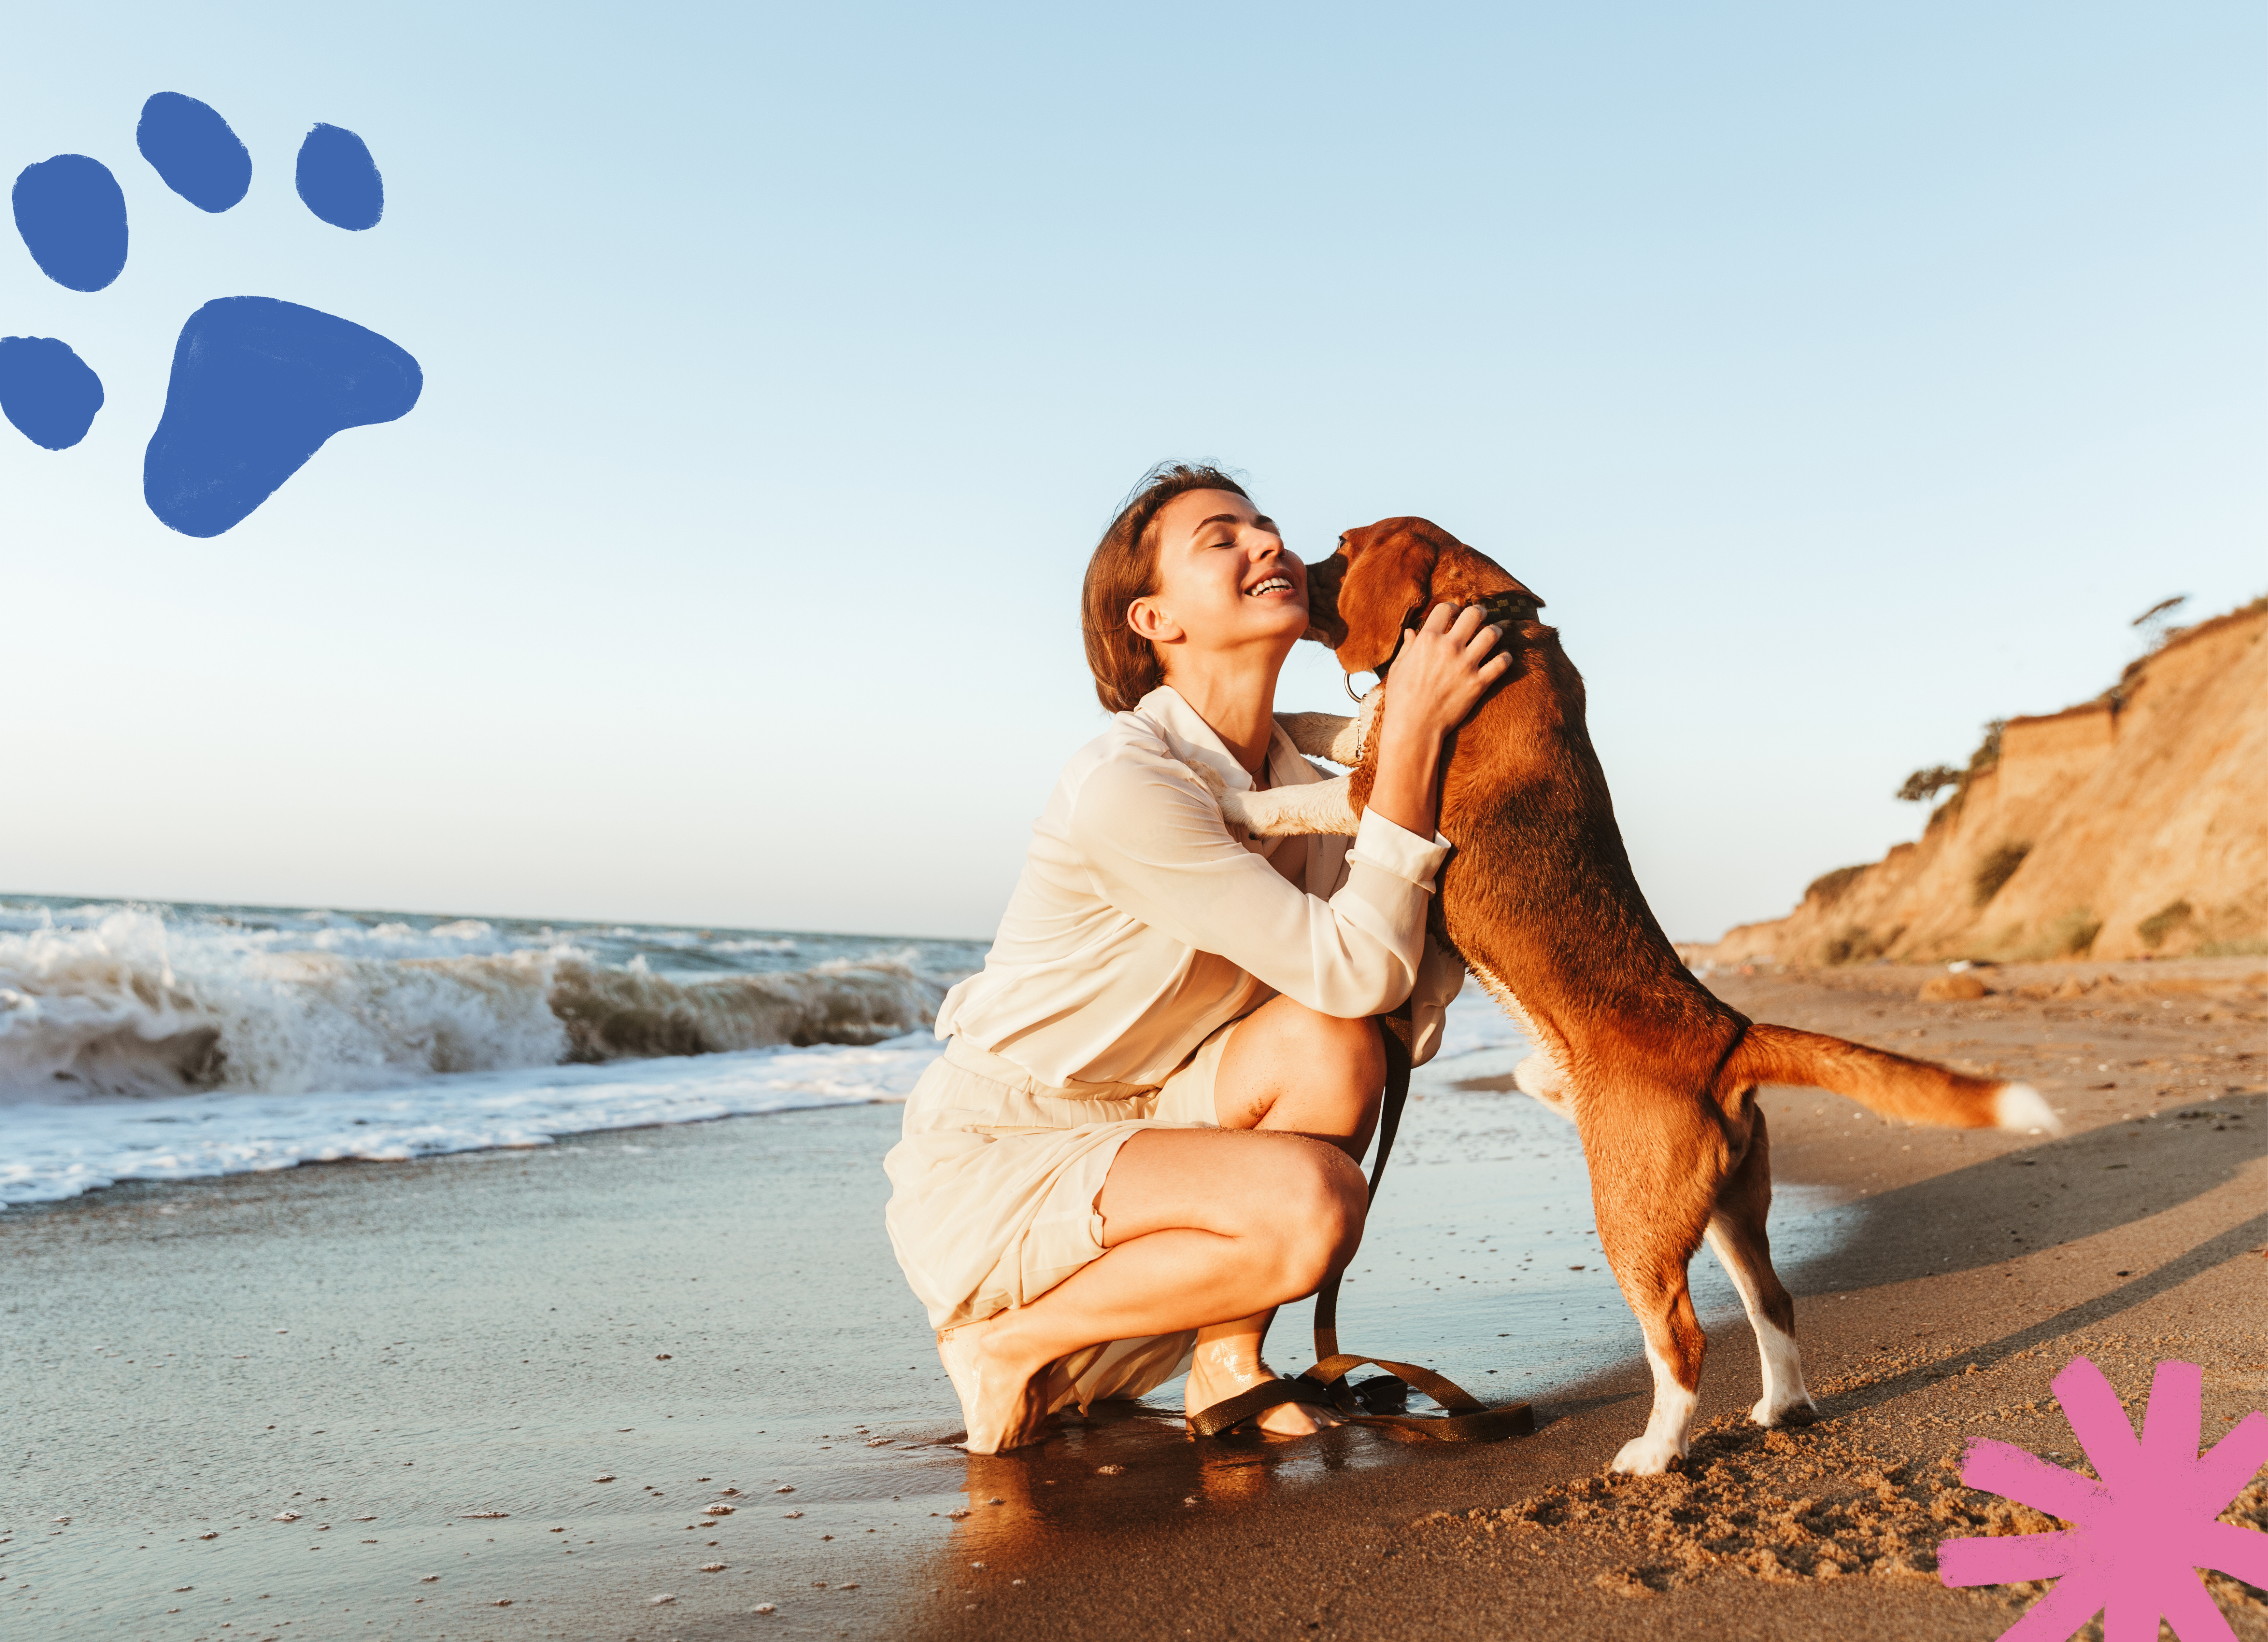 Young woman kneeling on a beach with a dog standing on its hind legs and its paws in her arms as if hugging her